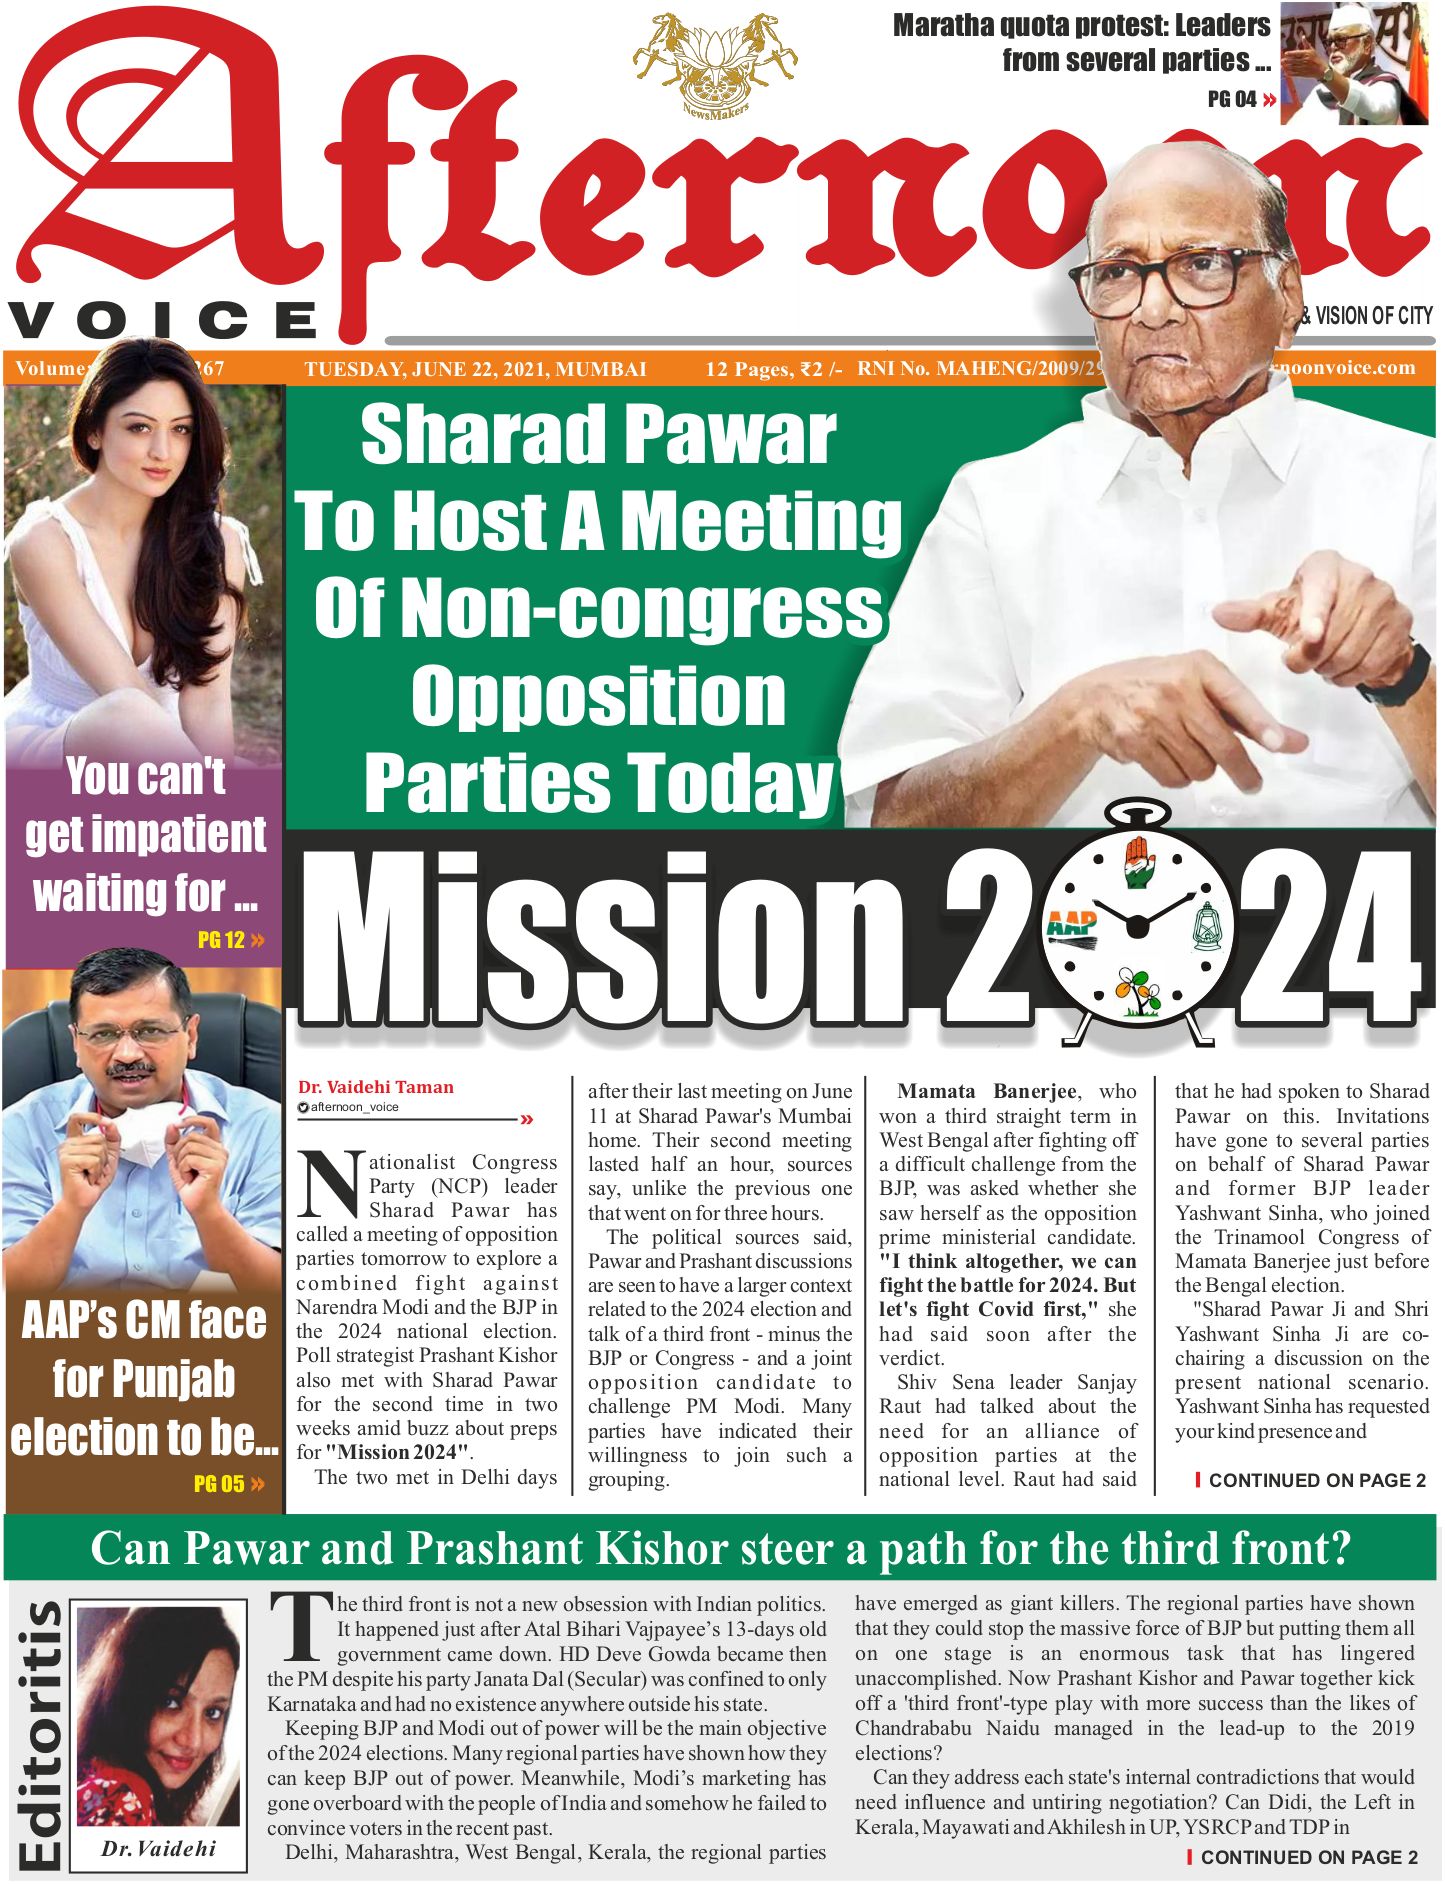 22 June 21 Page 1 Online English News Paper Daily News Epaper Today Newspaper